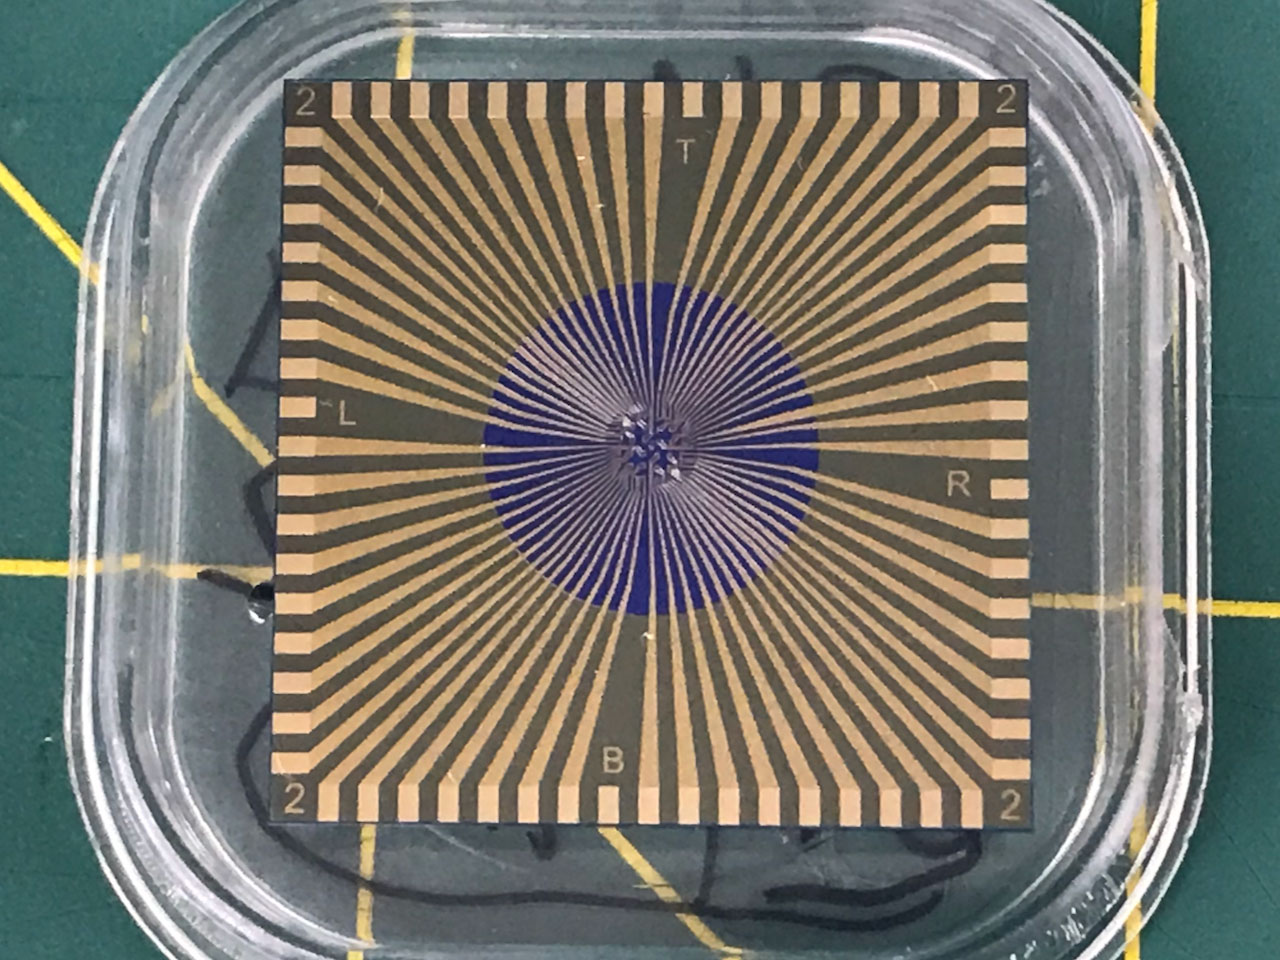 Example of the covid-flu dual test sensor chip up close. The chip is square with a striped pattern on top.